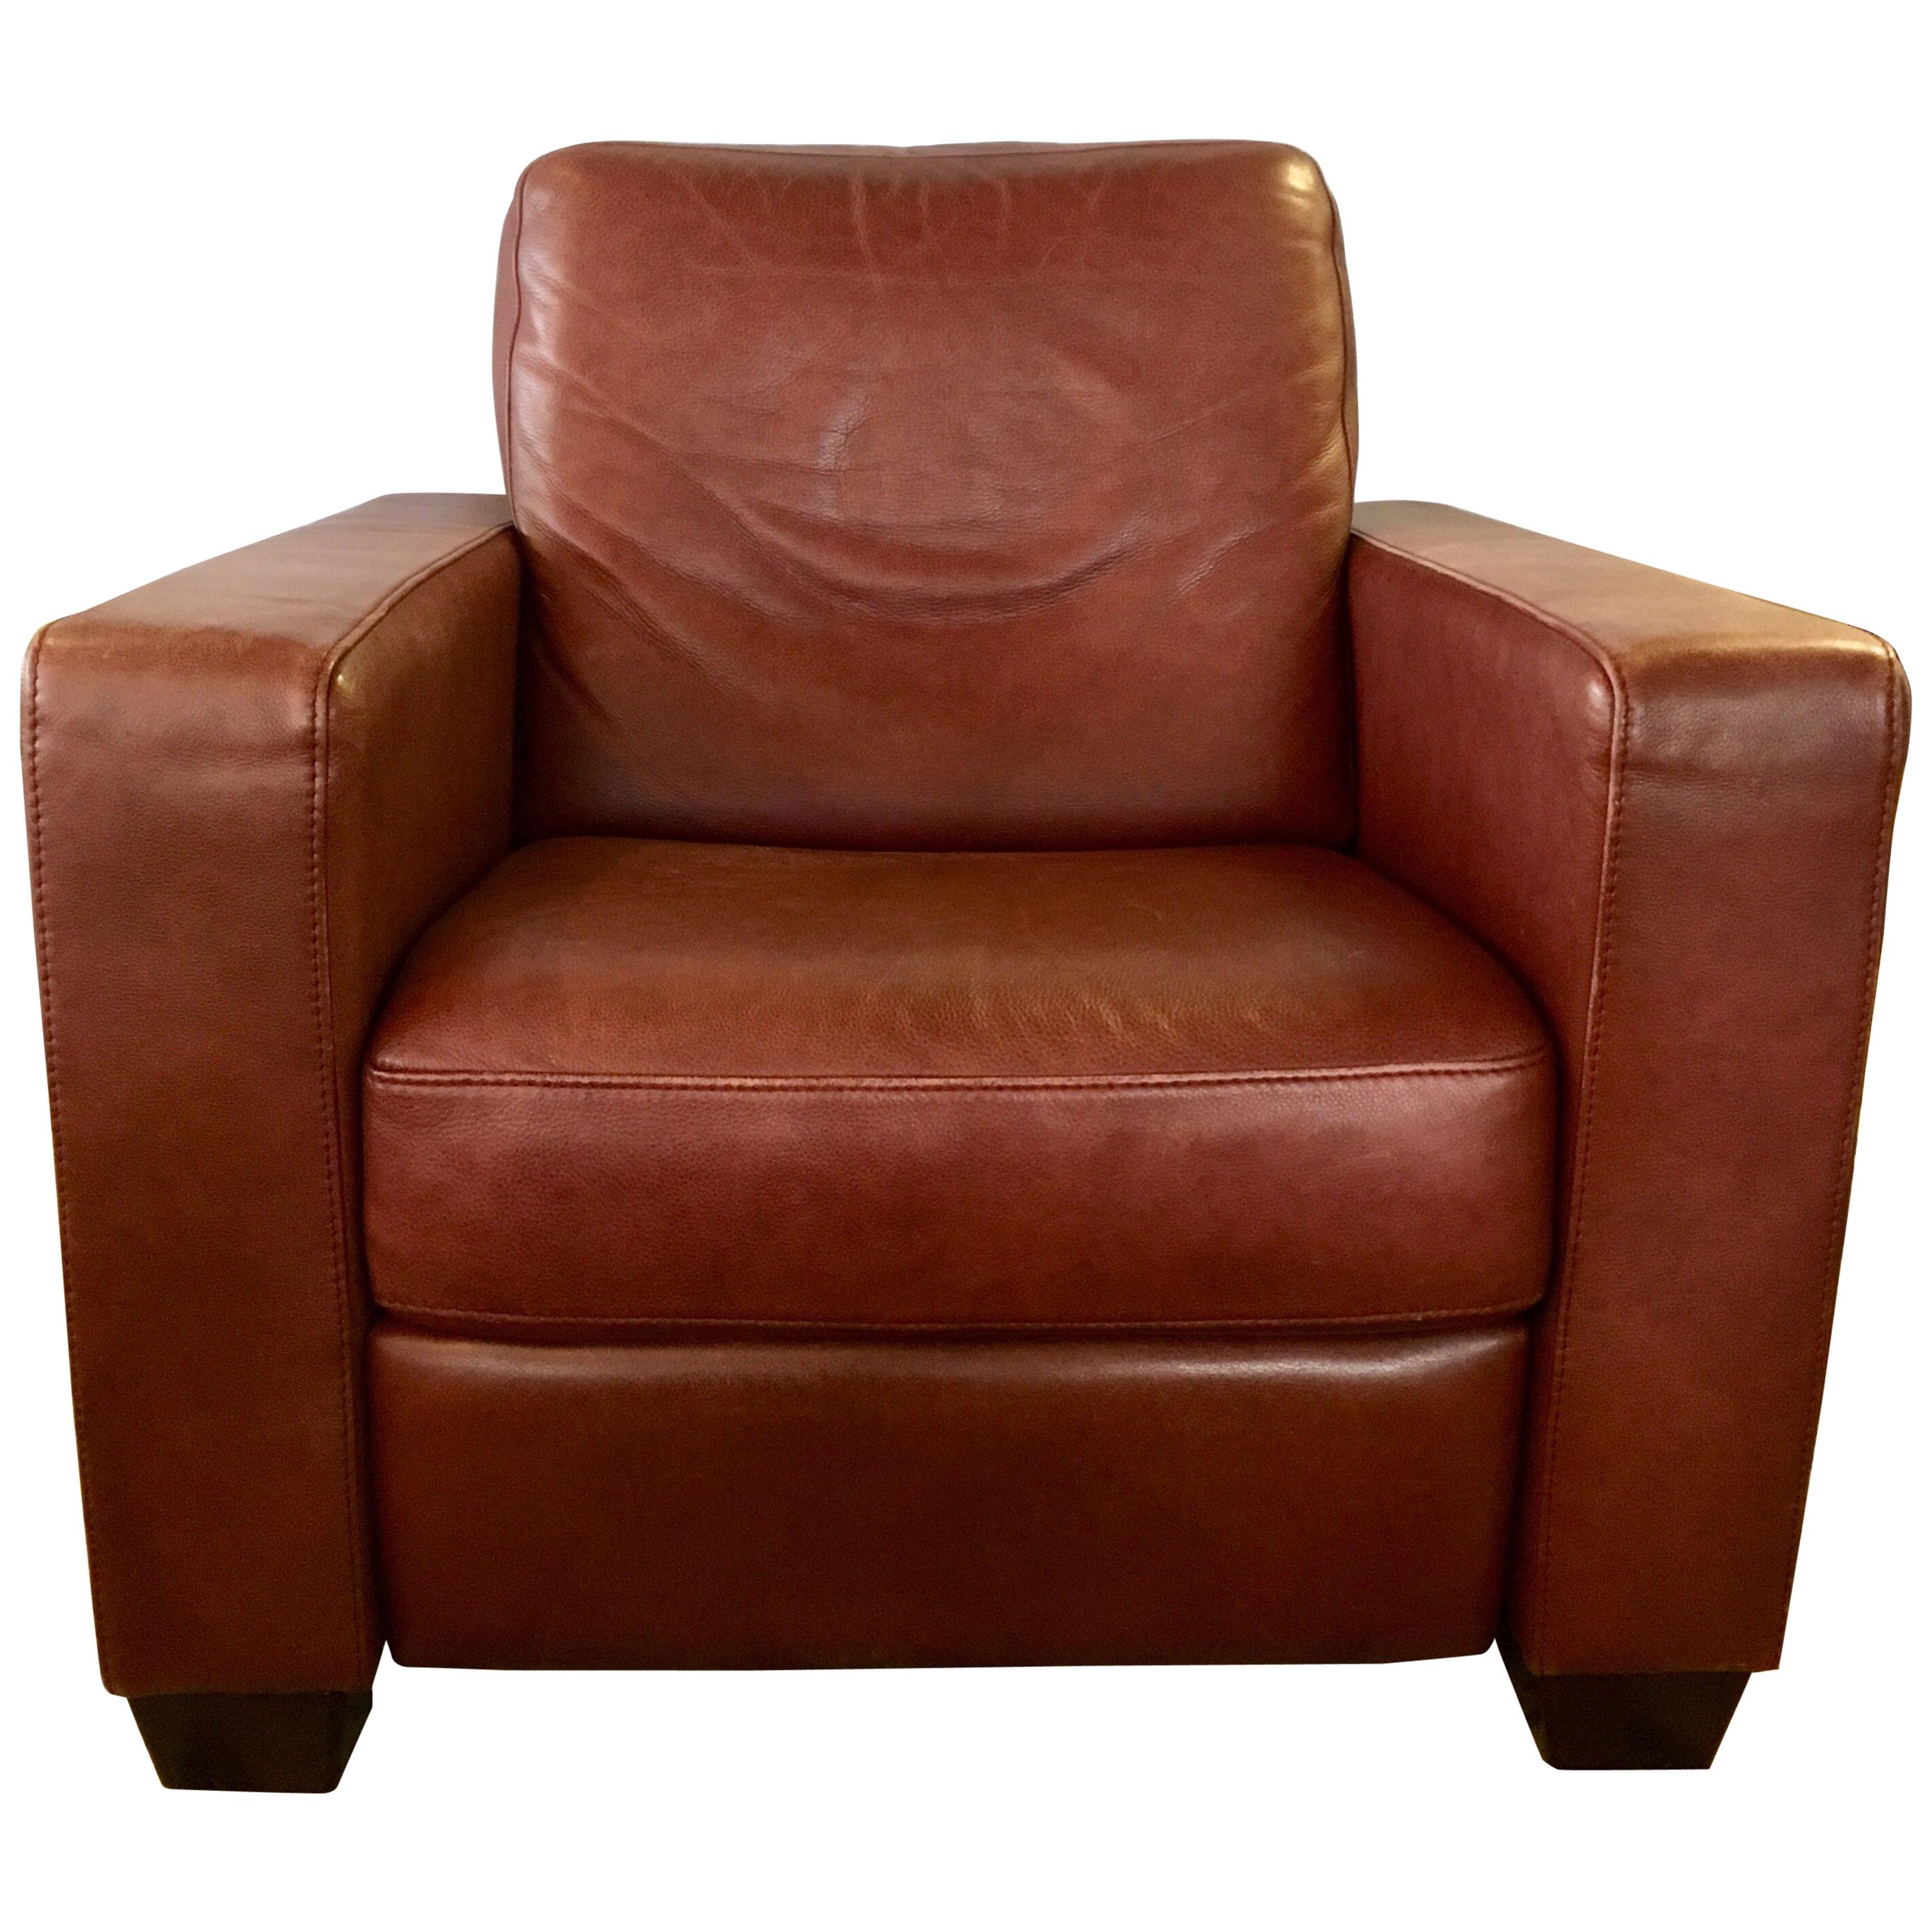 Mid-Century Modern Pebbled Leather Reclining Lounge Cigar Chair